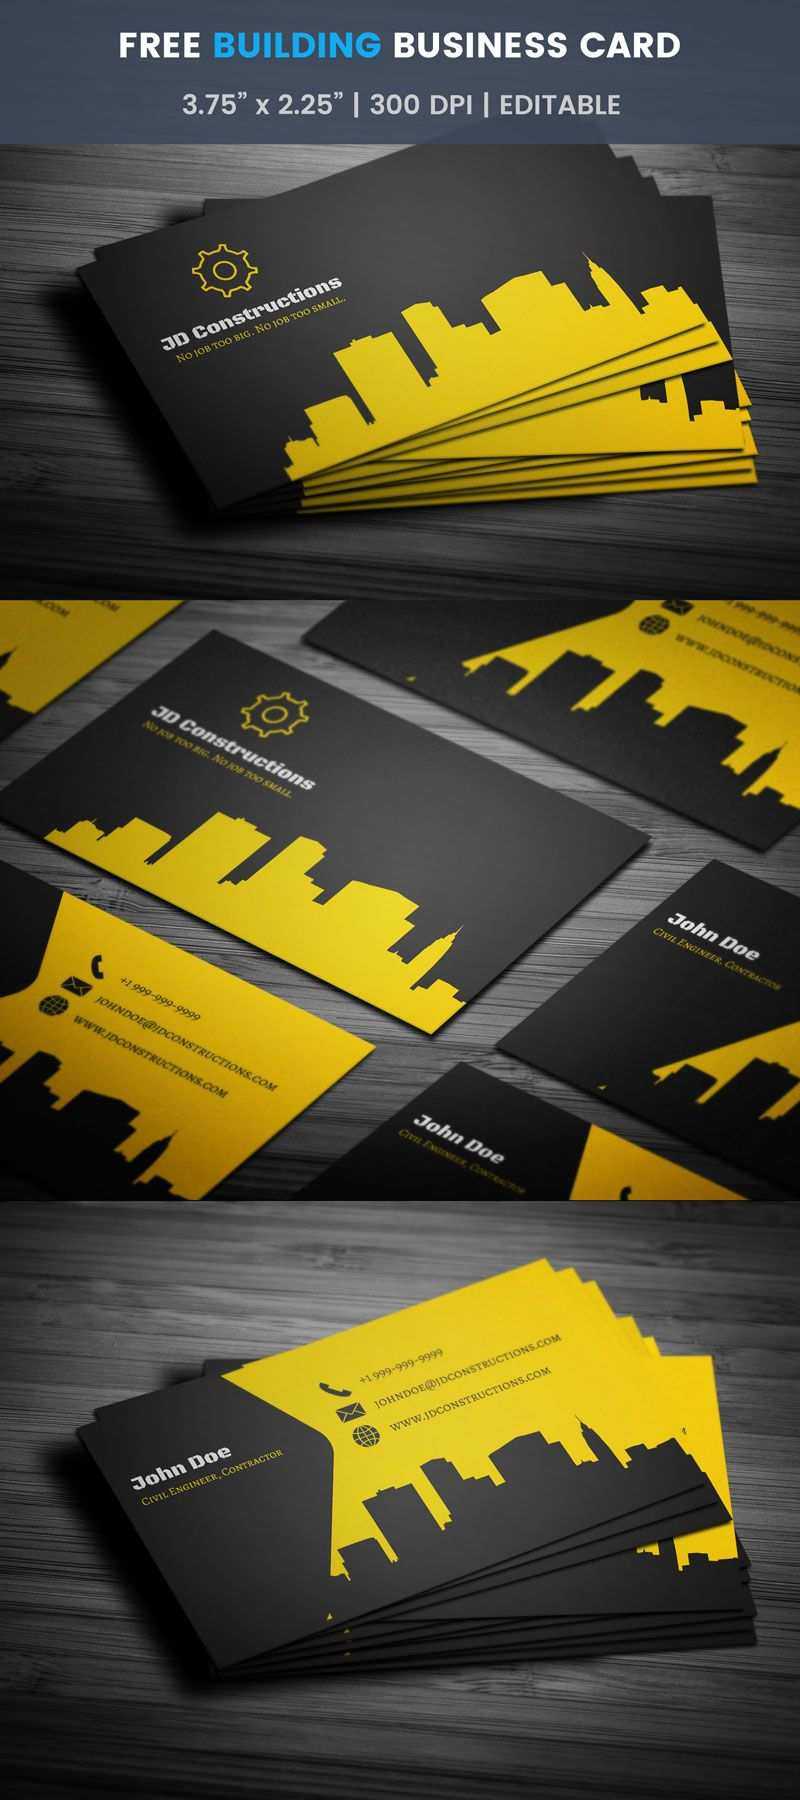 90 Blank Construction Business Card Templates Download Free For Construction Business Card Templates Download Free